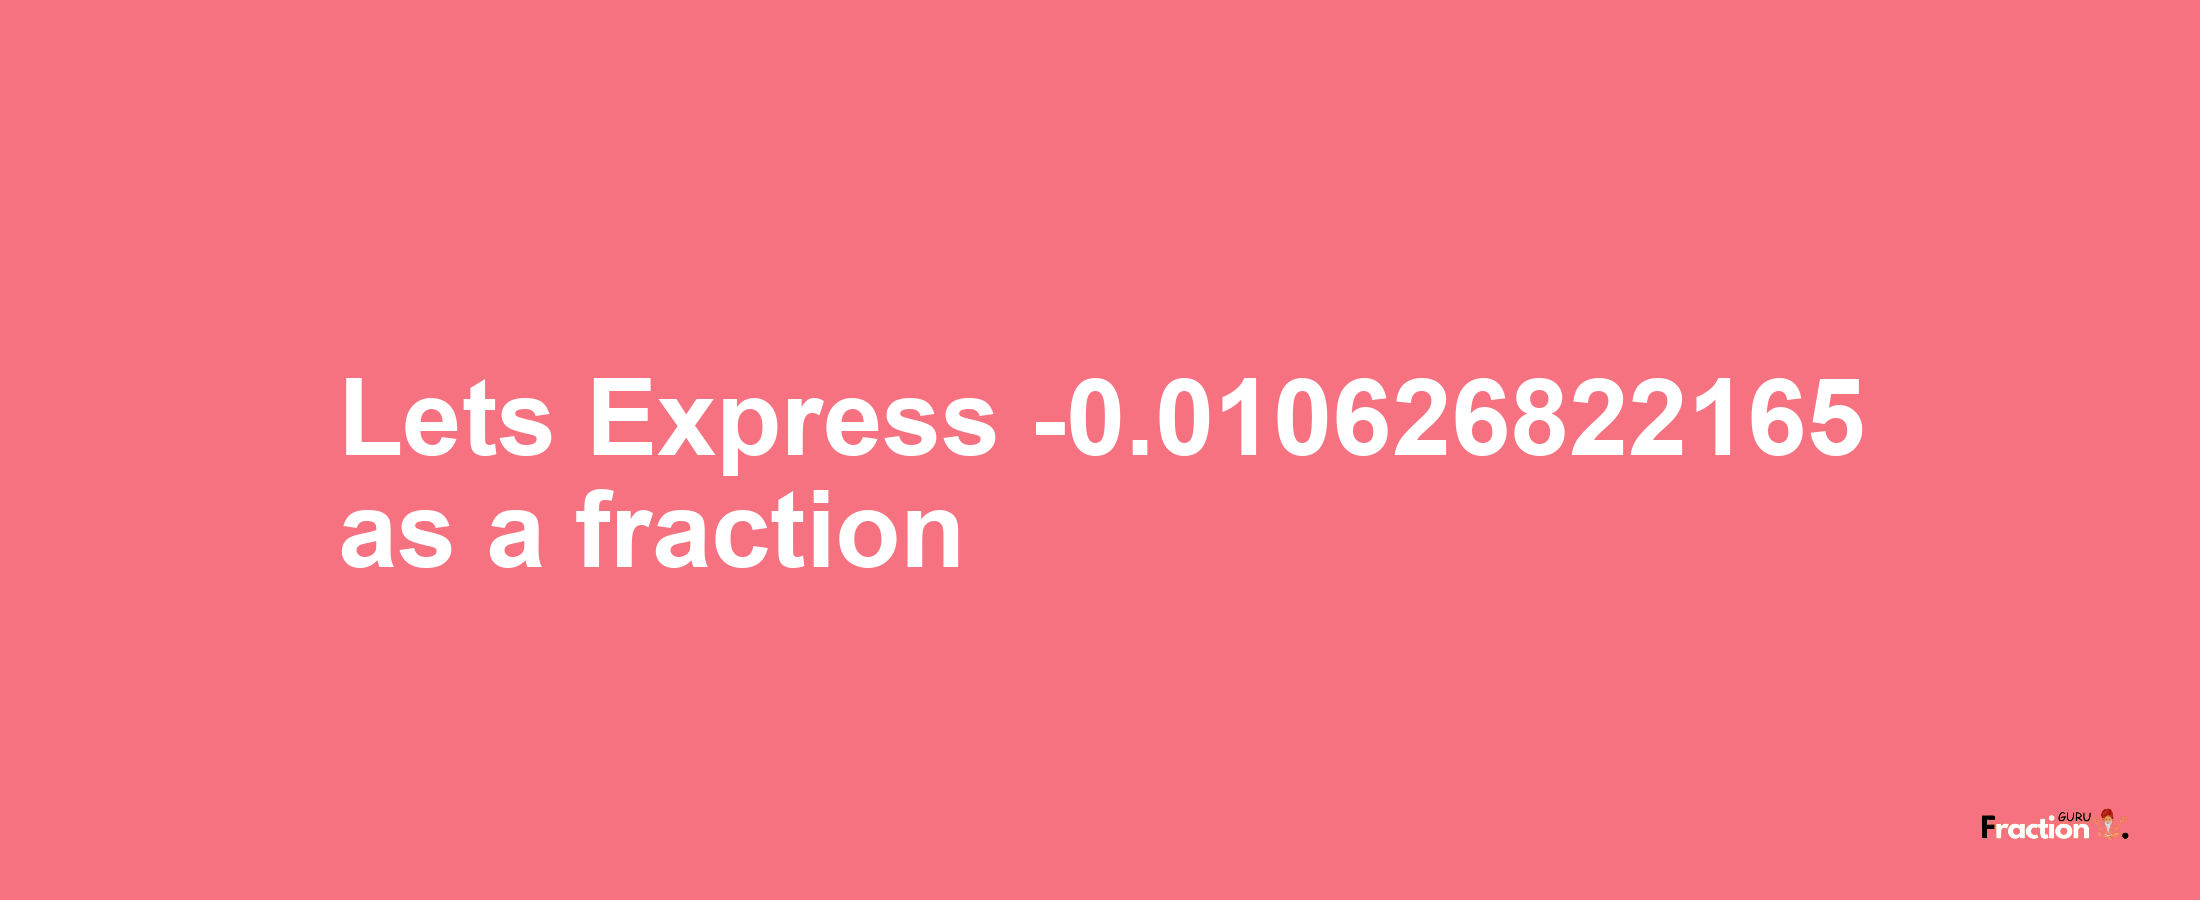 Lets Express -0.010626822165 as afraction